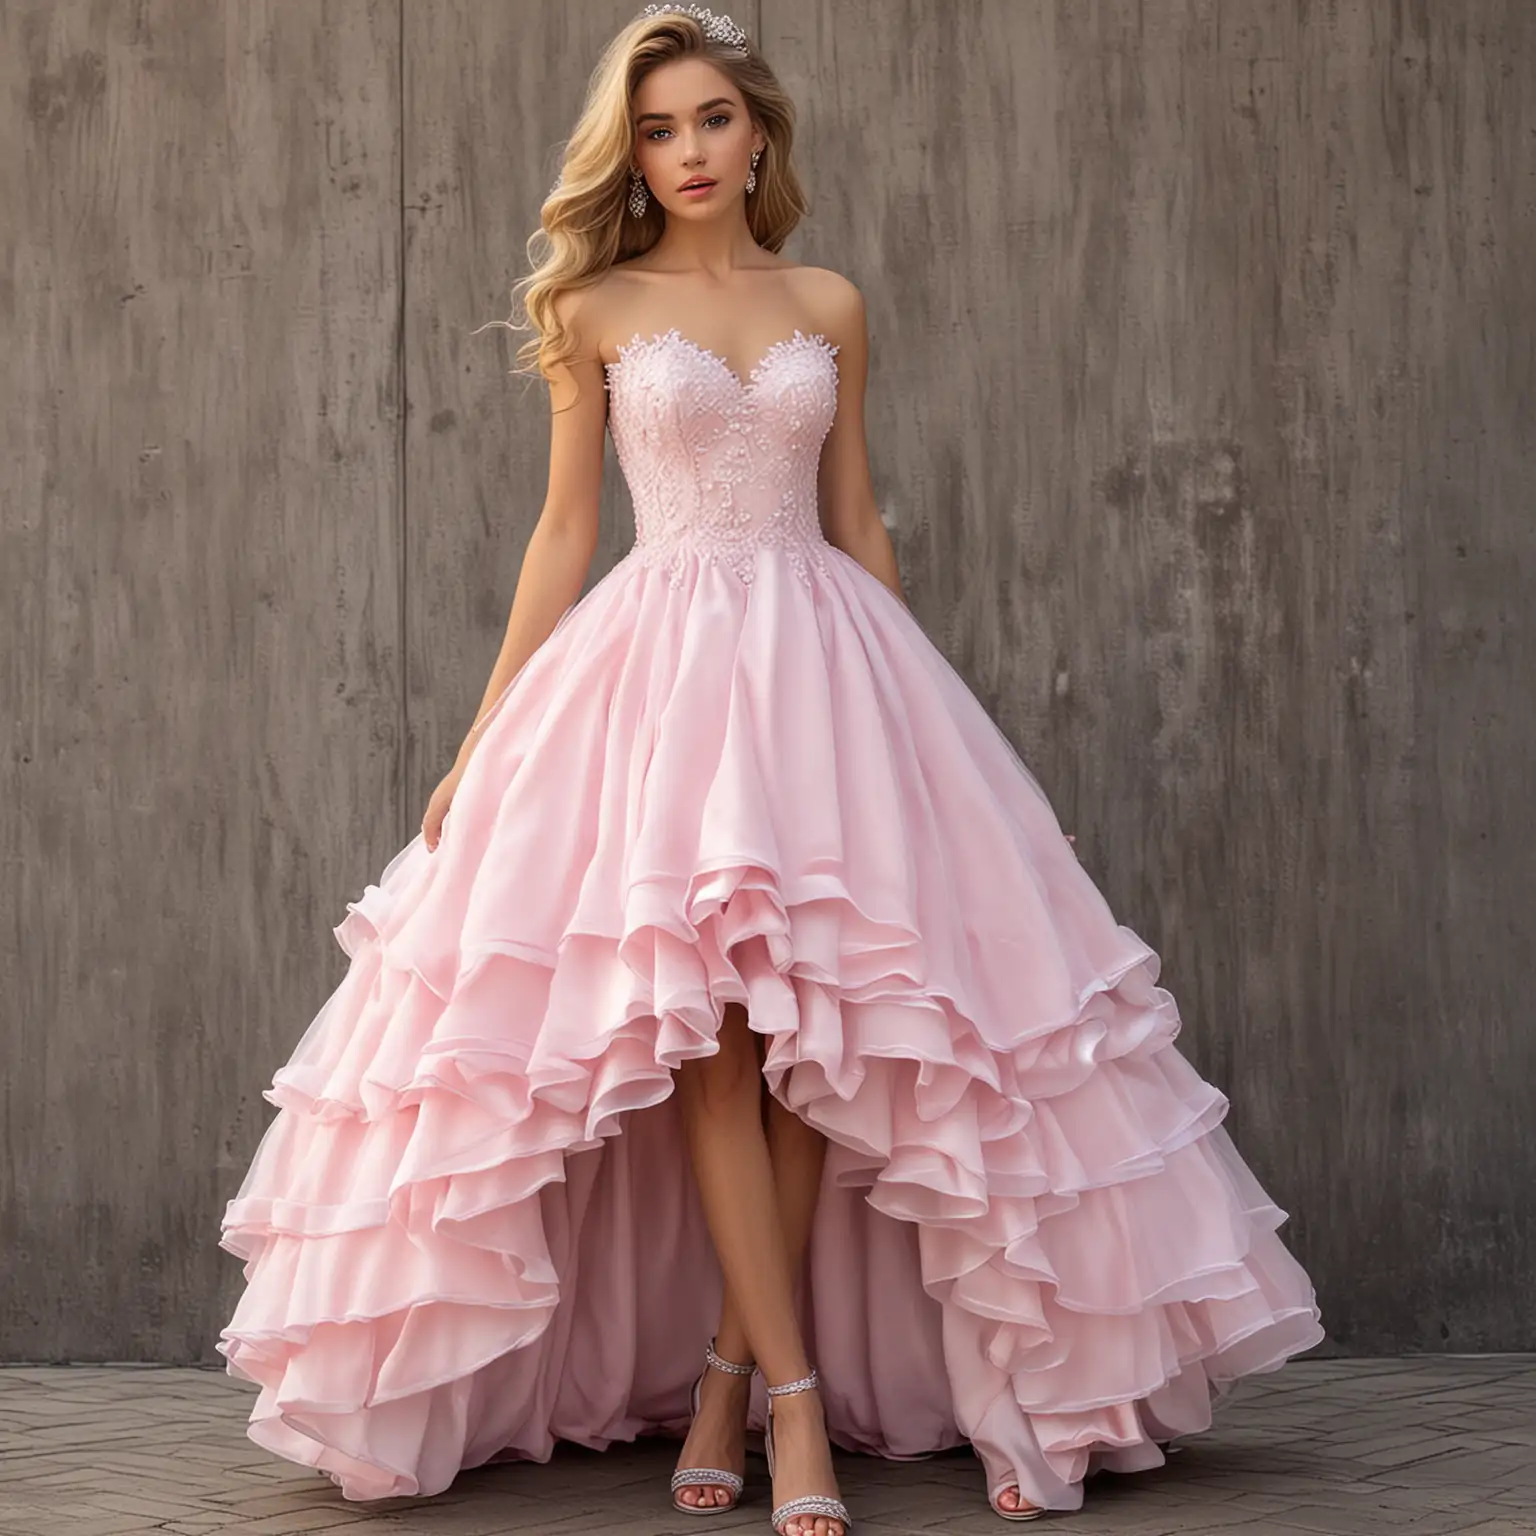 Elegant Pastel Prom Dress for Girls Fashionable Attire in Soft Hues